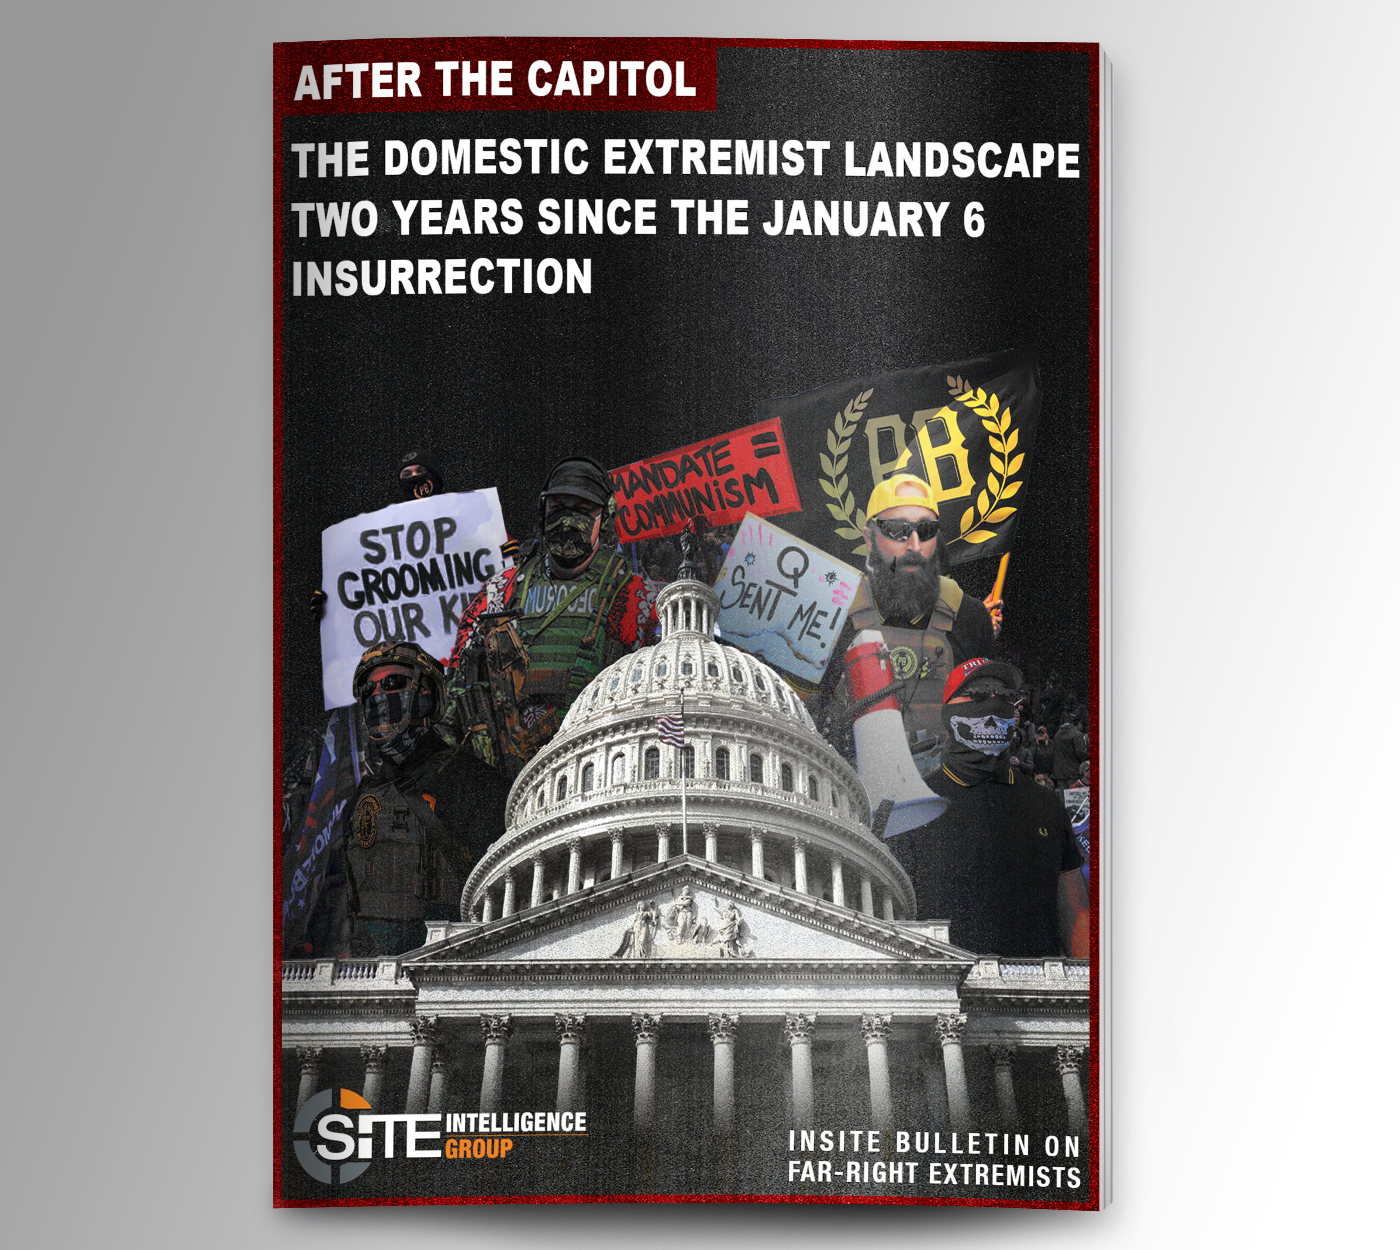 After the Capitol: The Domestic Extremist Landscape Two Years Since the January 6 Insurrection